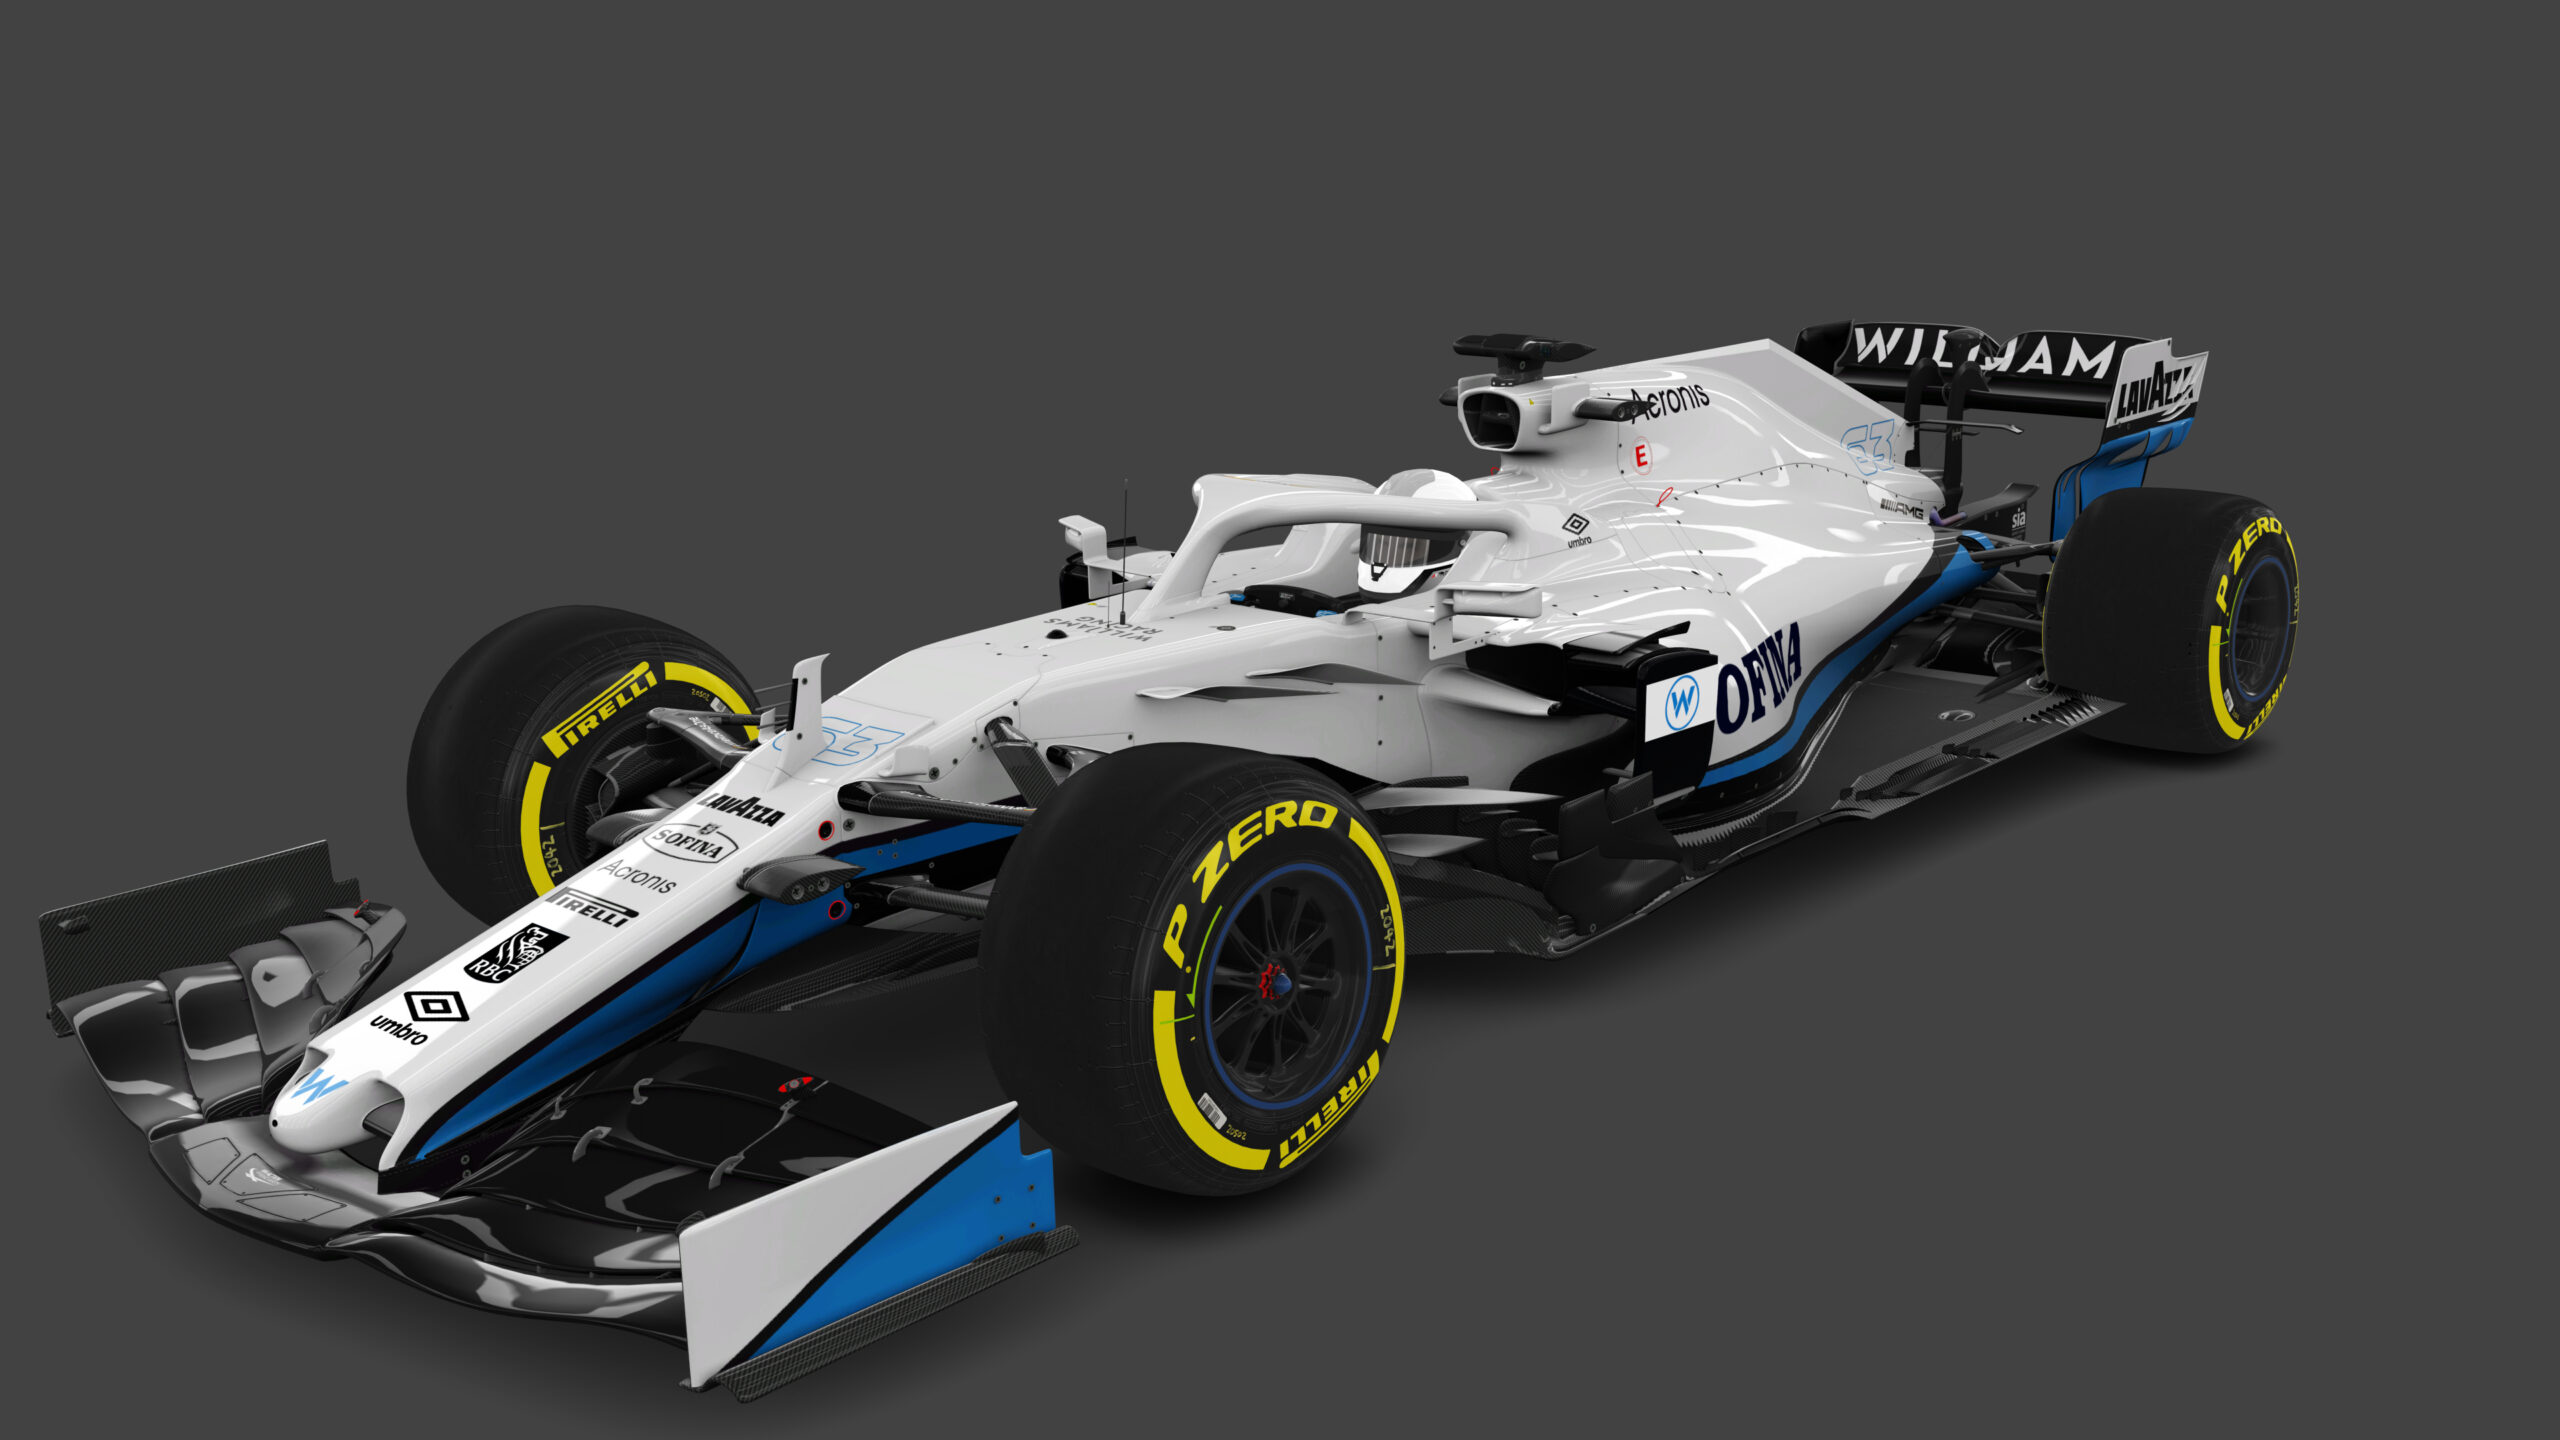 Williams Racing [63 George Russell]